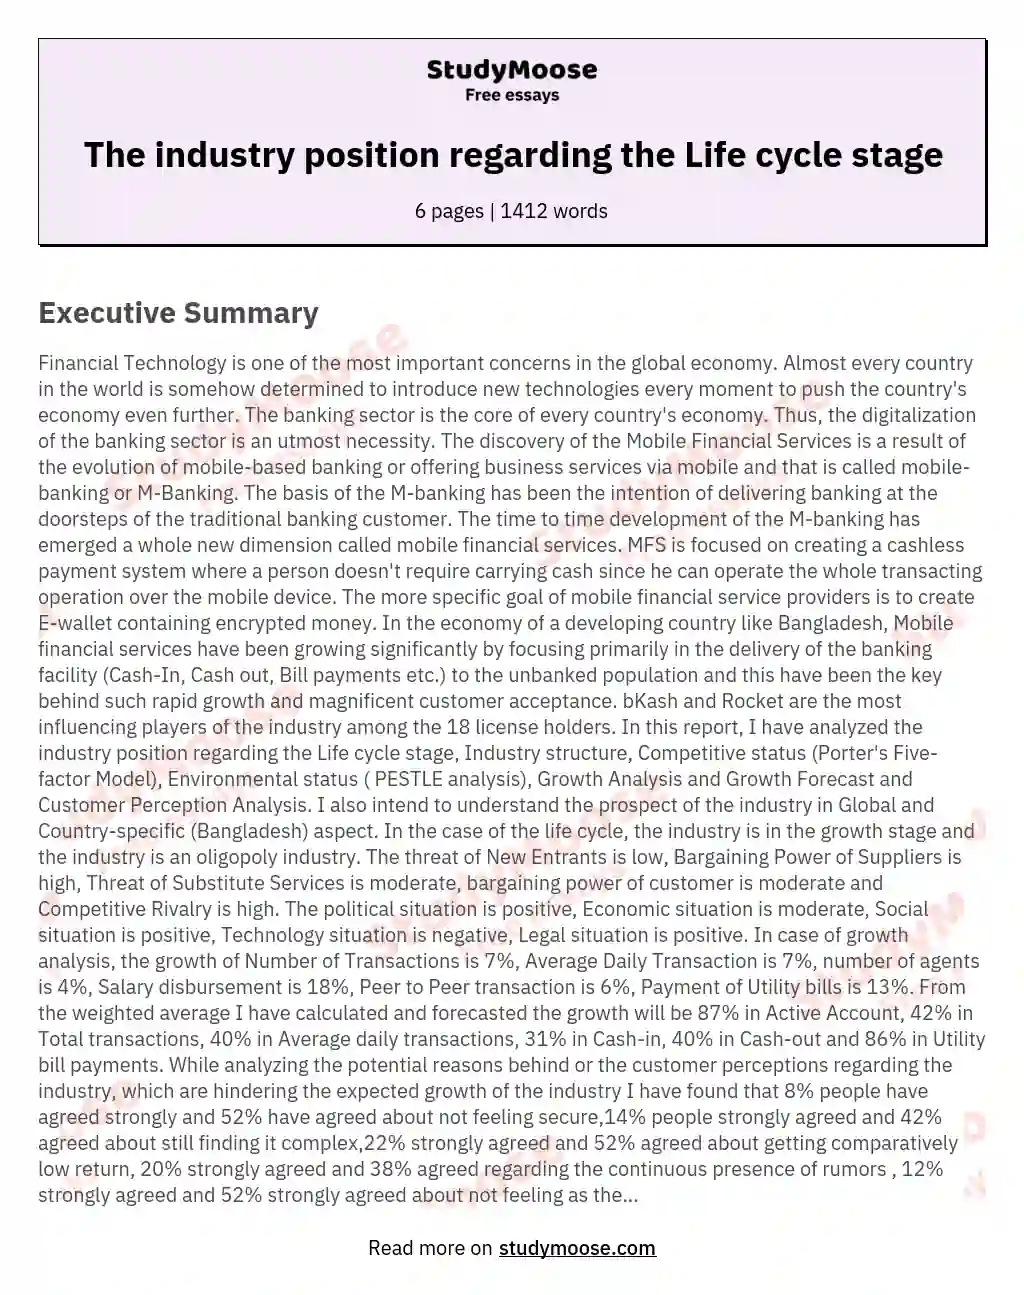 The industry position regarding the Life cycle stage essay